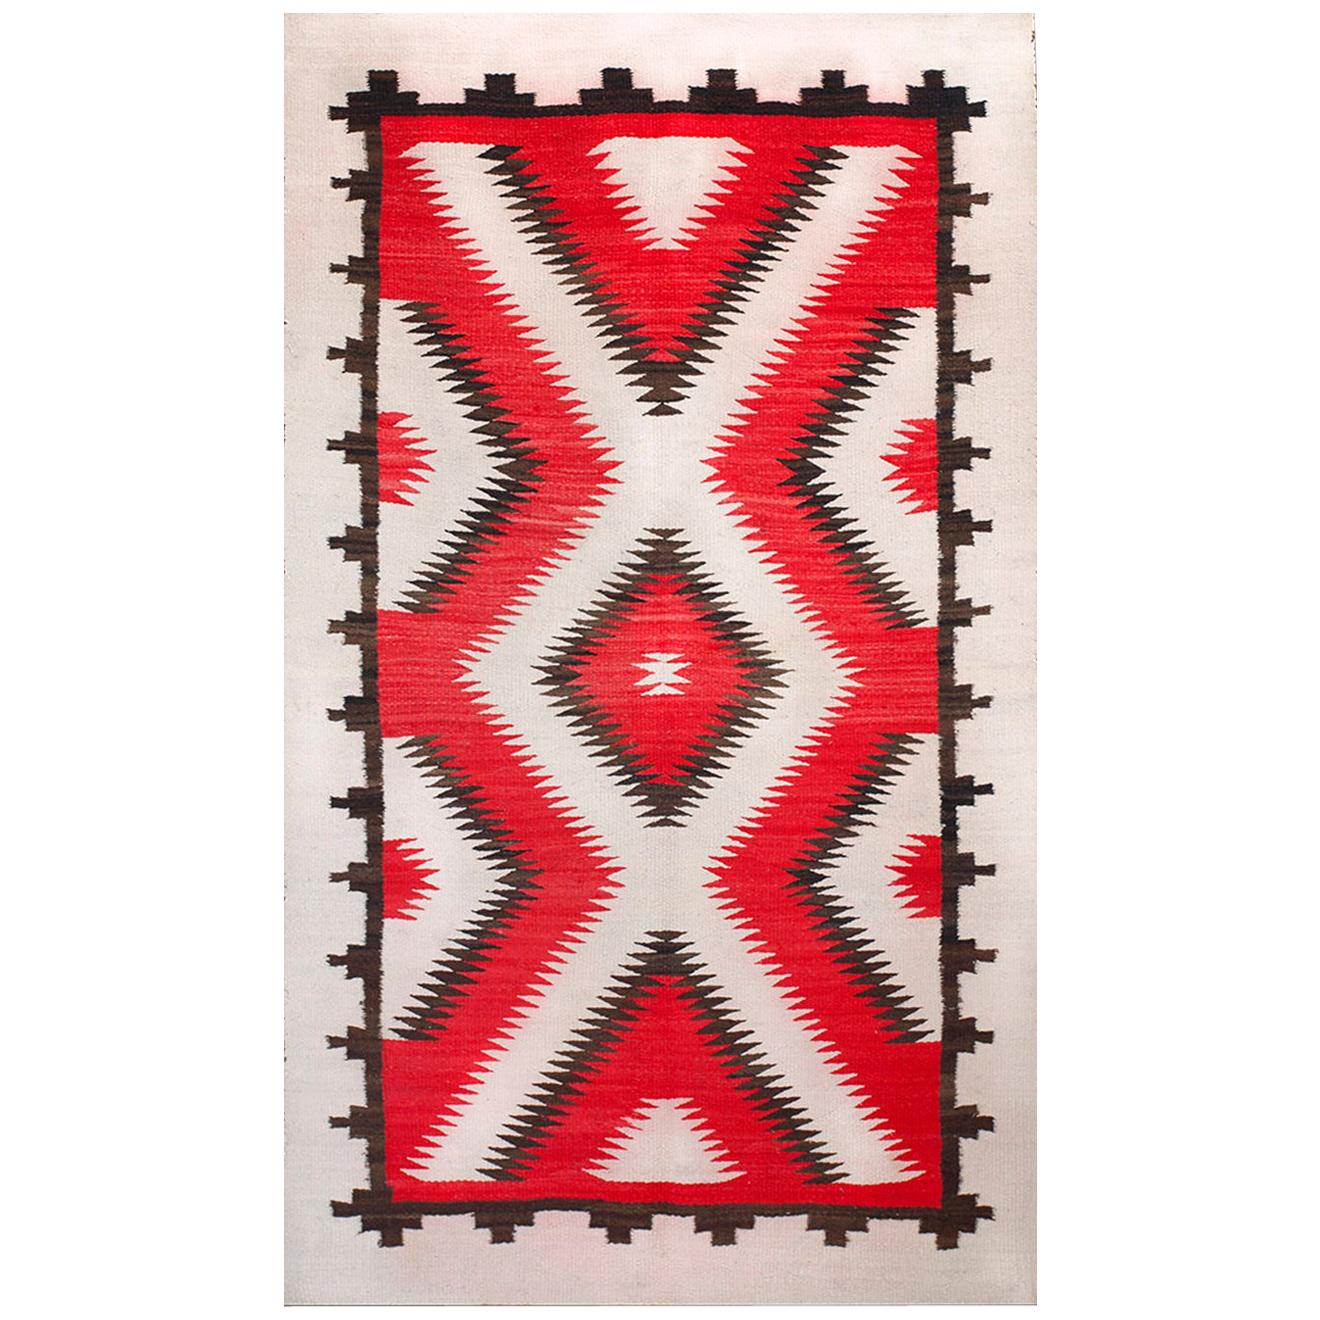 Early 20th Century American Navajo Carpet ( 5'2" x 8'3" - 152 x 251 ) For Sale